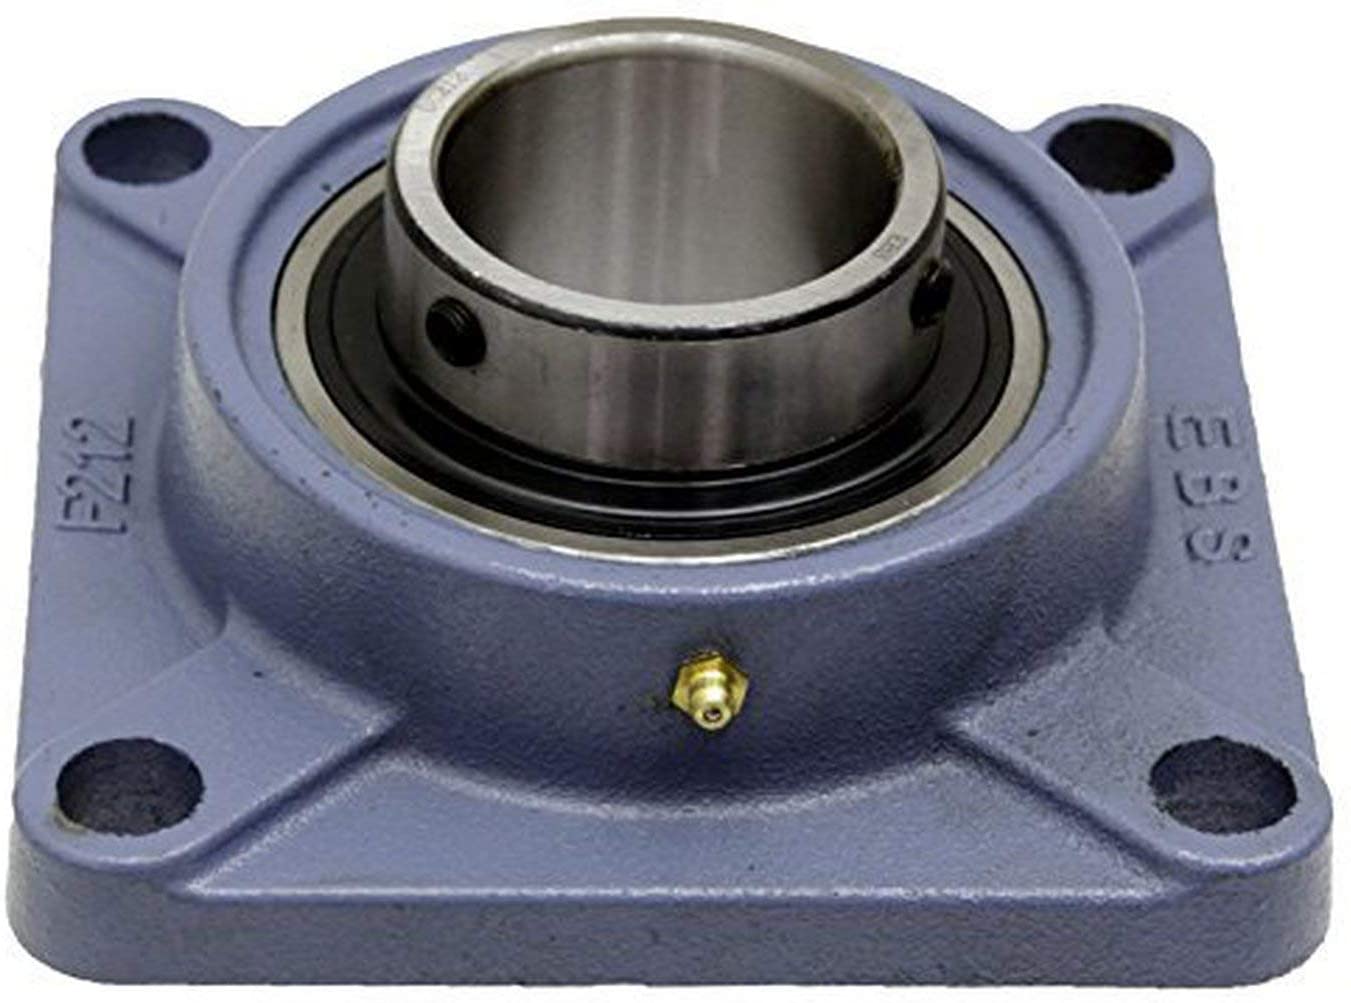 UCF211  GENERIC Normal duty 4 bolt cast iron flange self-lube housed unit - Metric Thumbnail